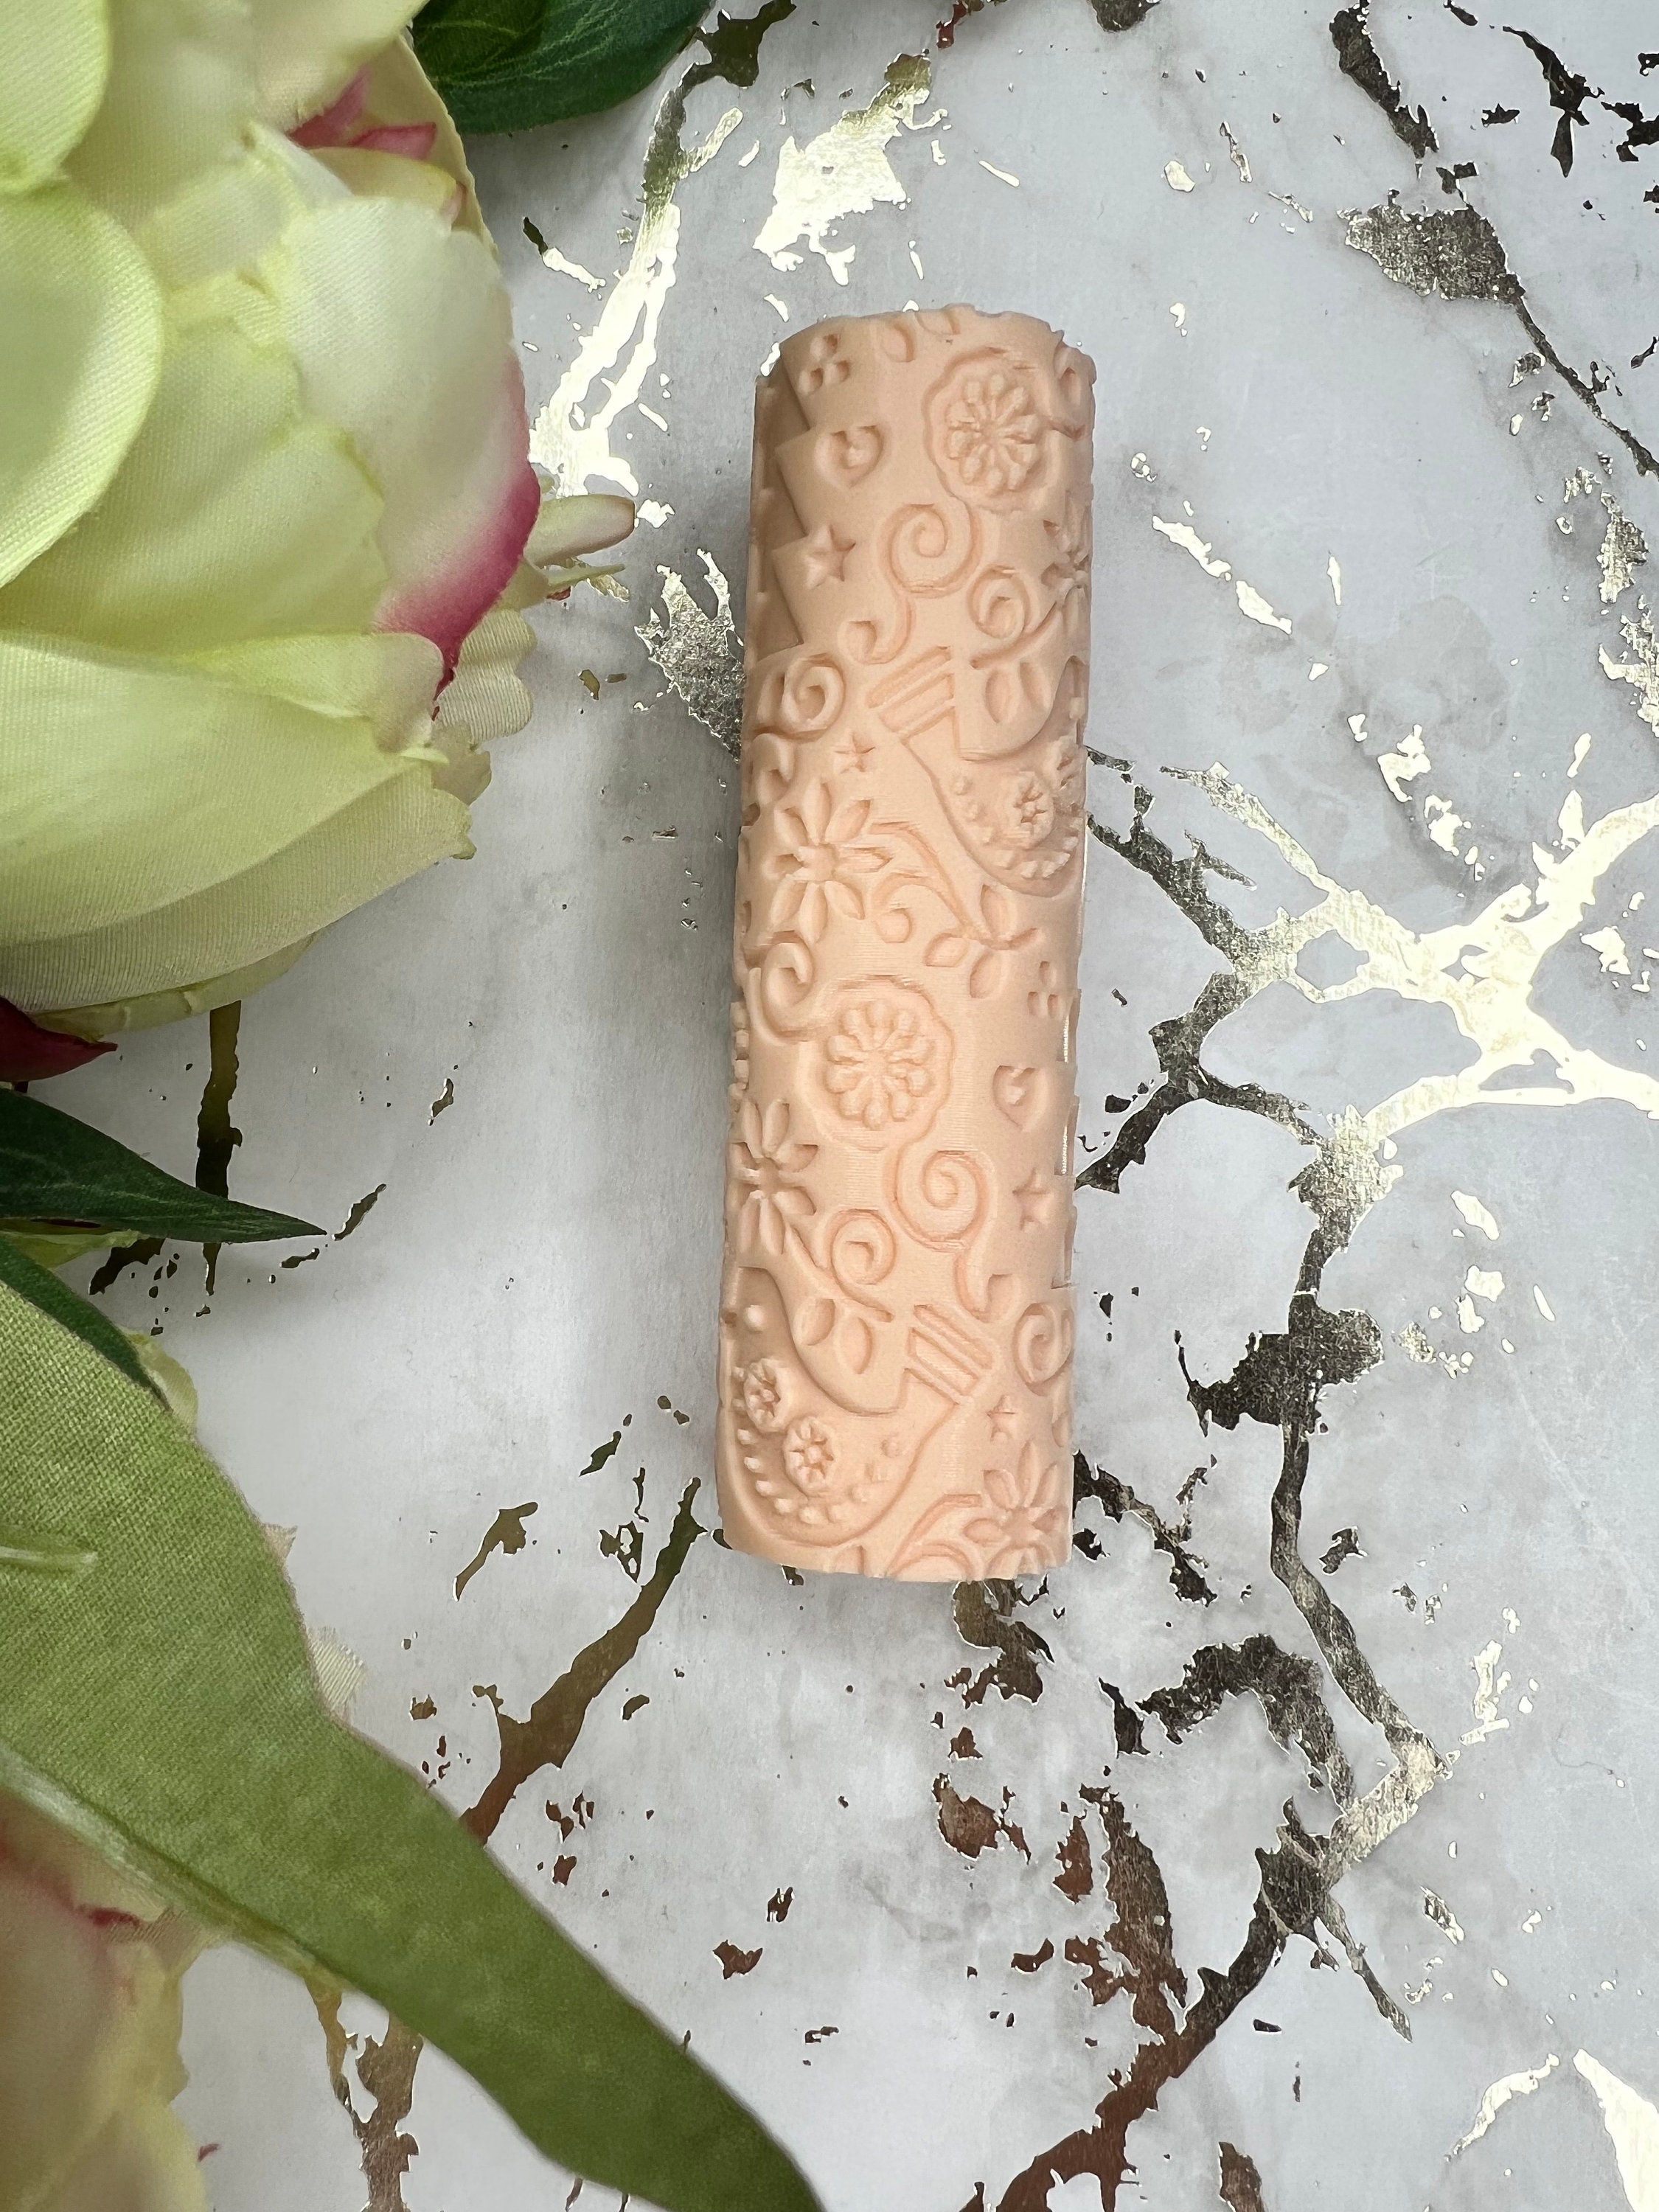  Puocaon Polymer Clay Texture Roller - Daisy Flower